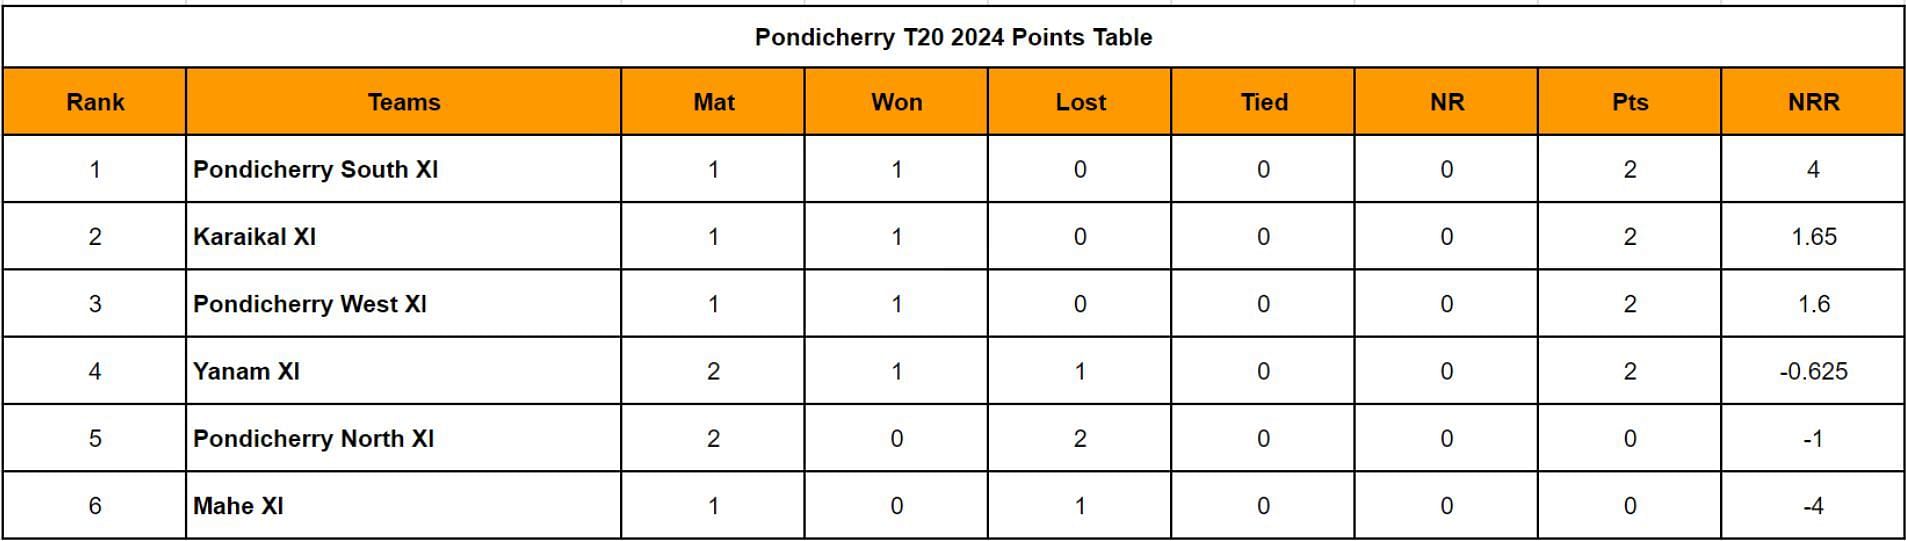 Pondicherry T20 2024 Points Table Updated standings after Match 4